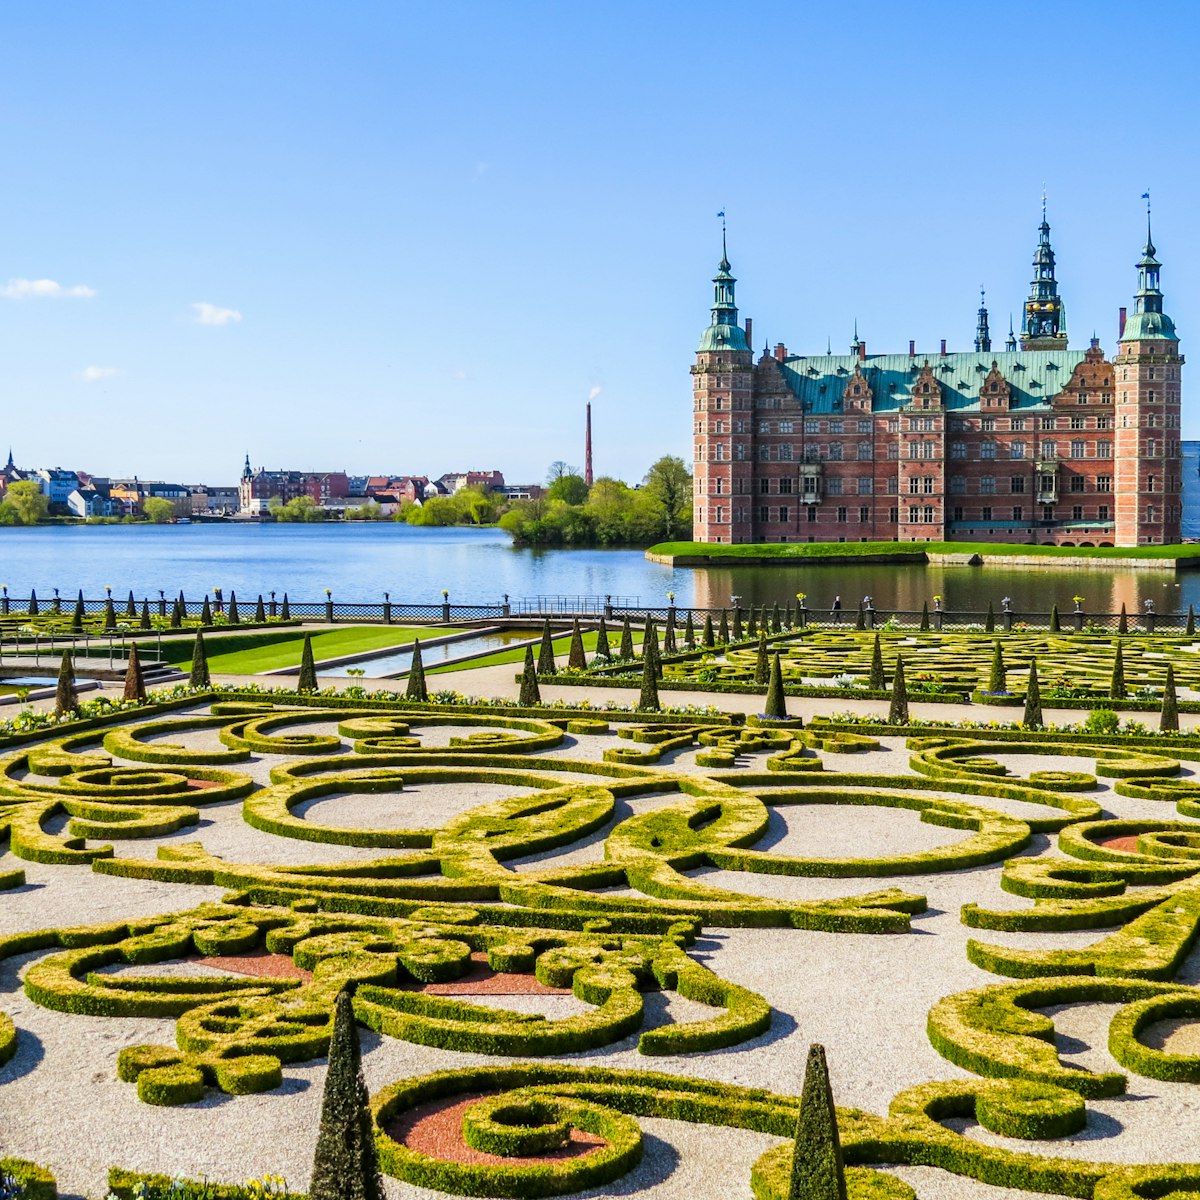 Park and Palace Frederiksborg Slot, Hillerod, Denmark; Shutterstock ID 278747150; Your name (First / Last): AnneMarie McCarthy; GL account no.: 56530; Netsuite department name: Digital content; Full Product or Project name including edition: Destination project copenhagen day trips